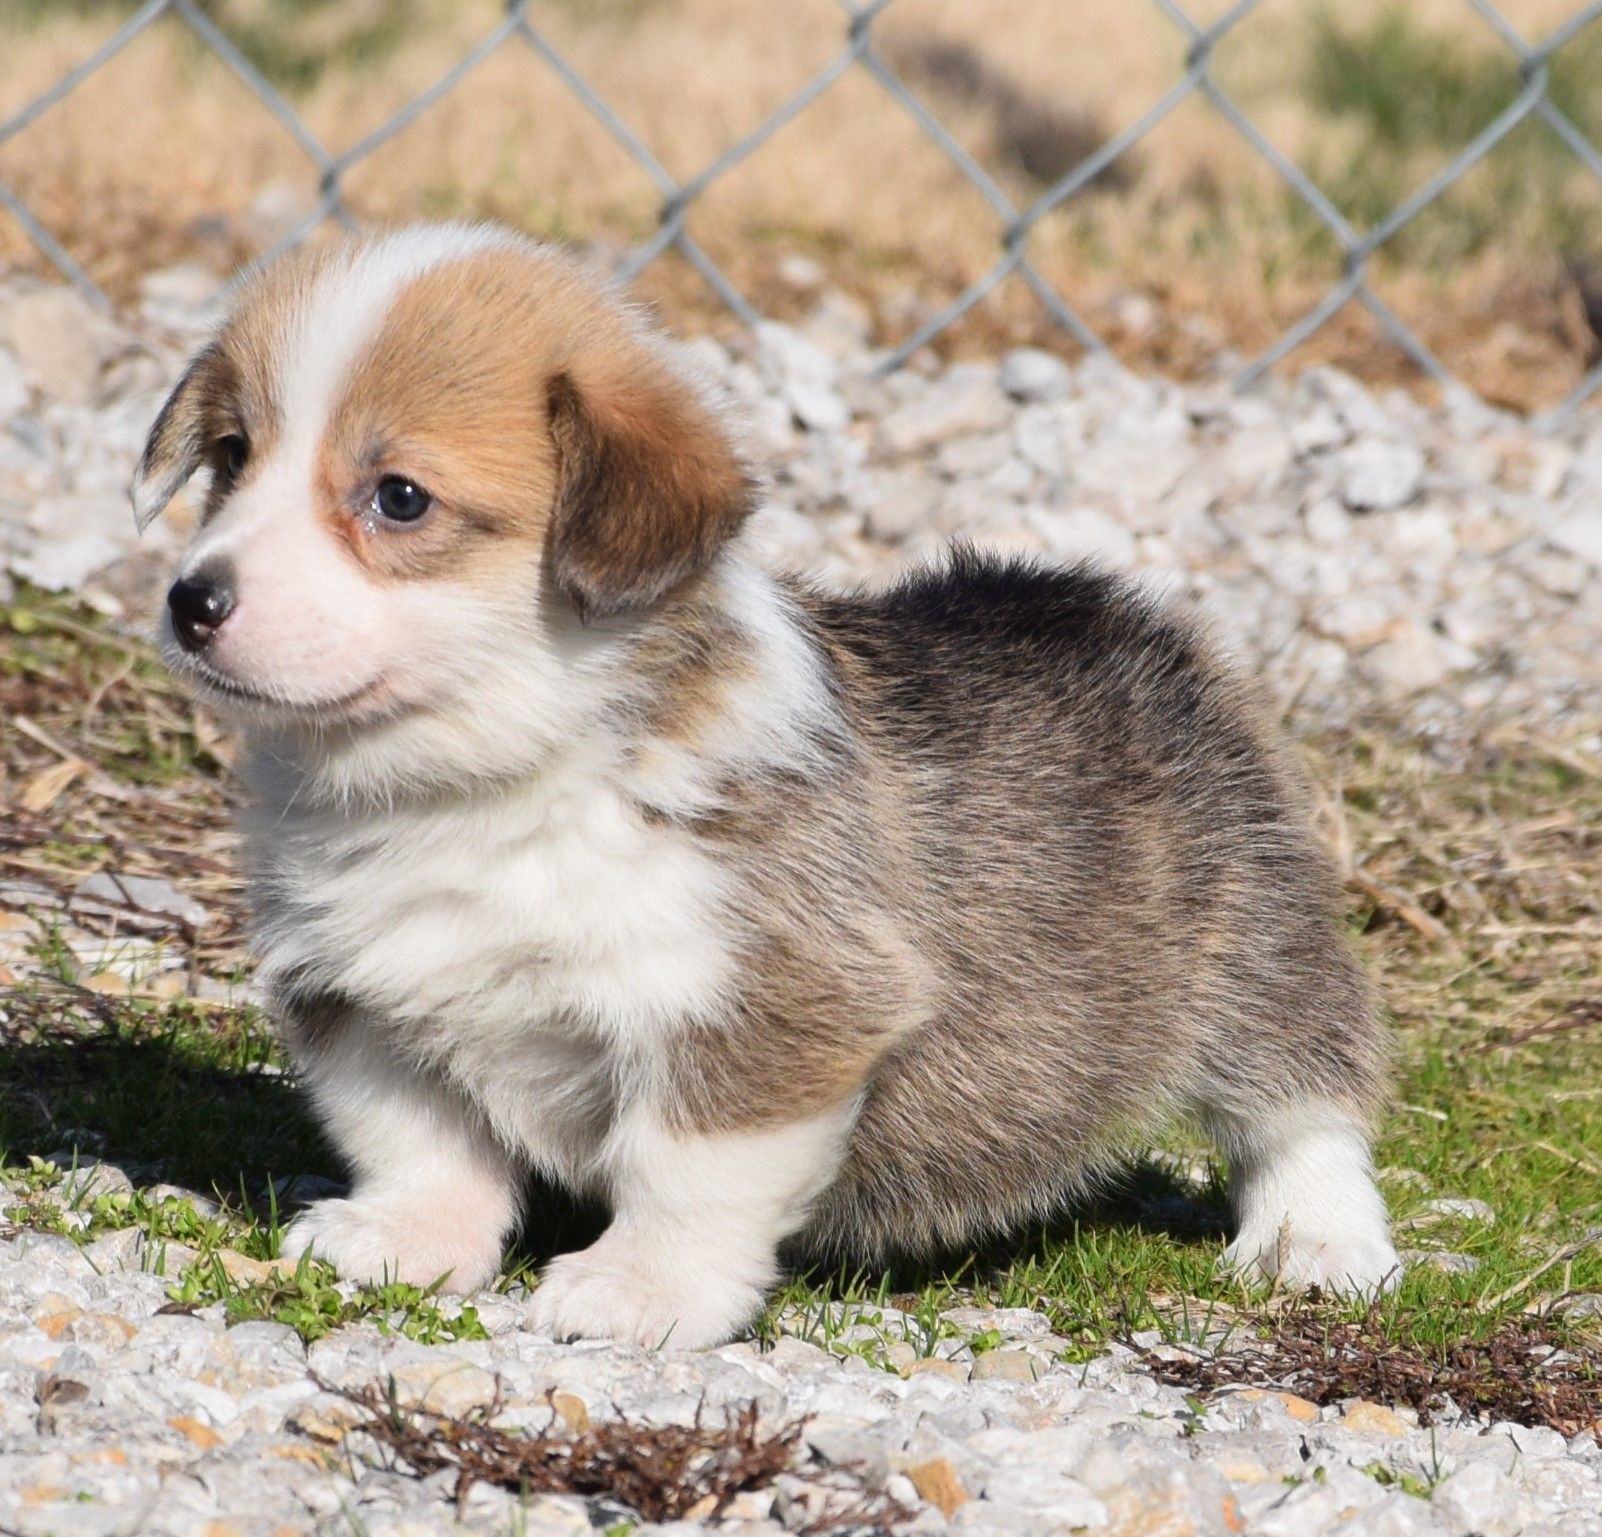 Begin your journey with corgi puppies the right way. Learn the basics of care, training, and bonding